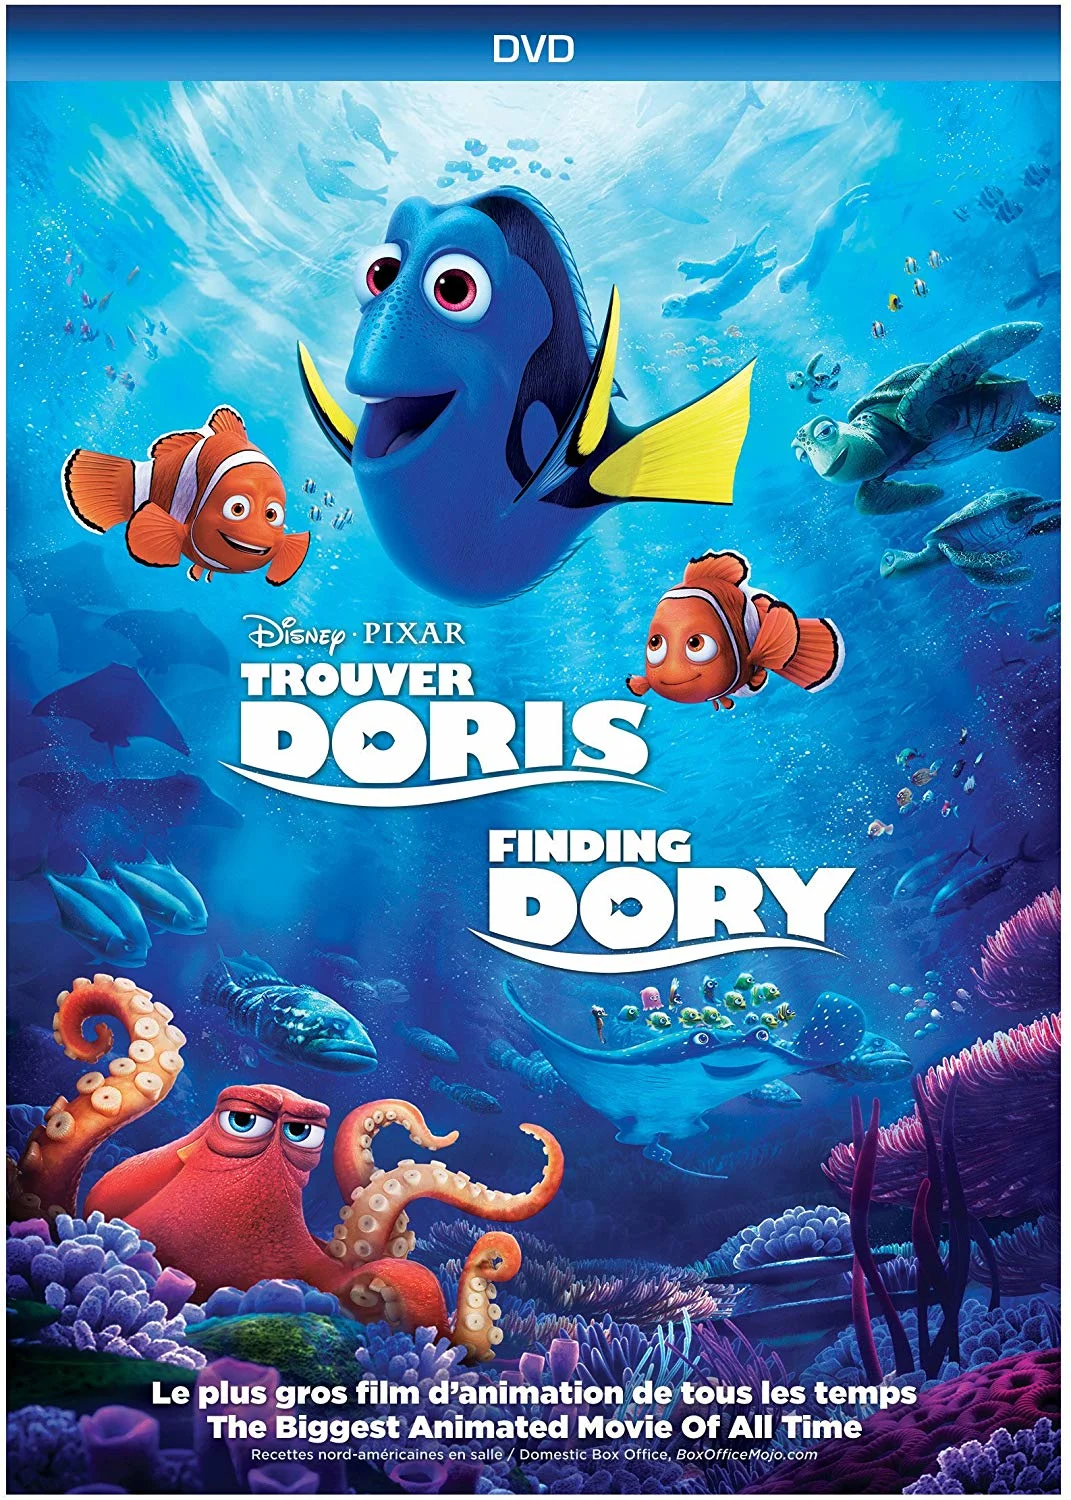 Finding Dory (DVD) on MovieShack